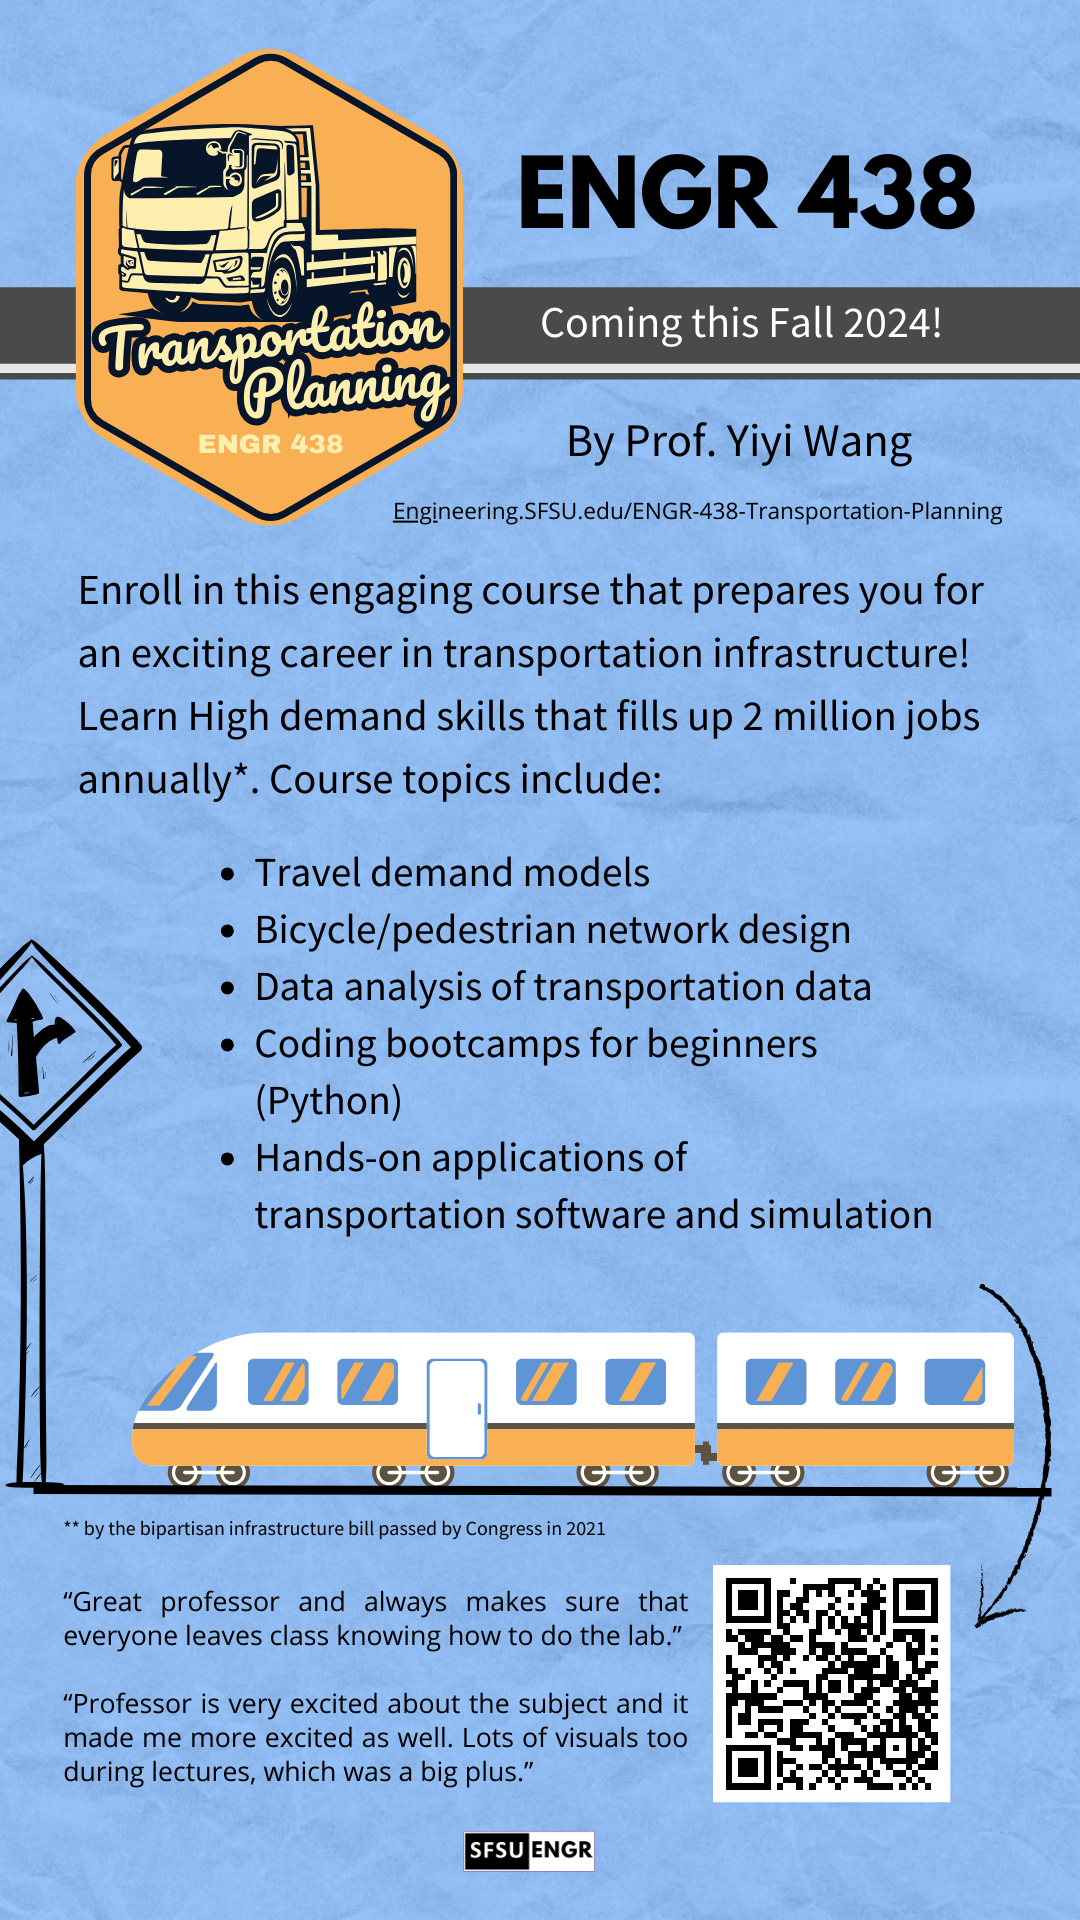 SFSU Engineering ENGR438 Transportaiton Planning Promotional Flyer for Fall 2024